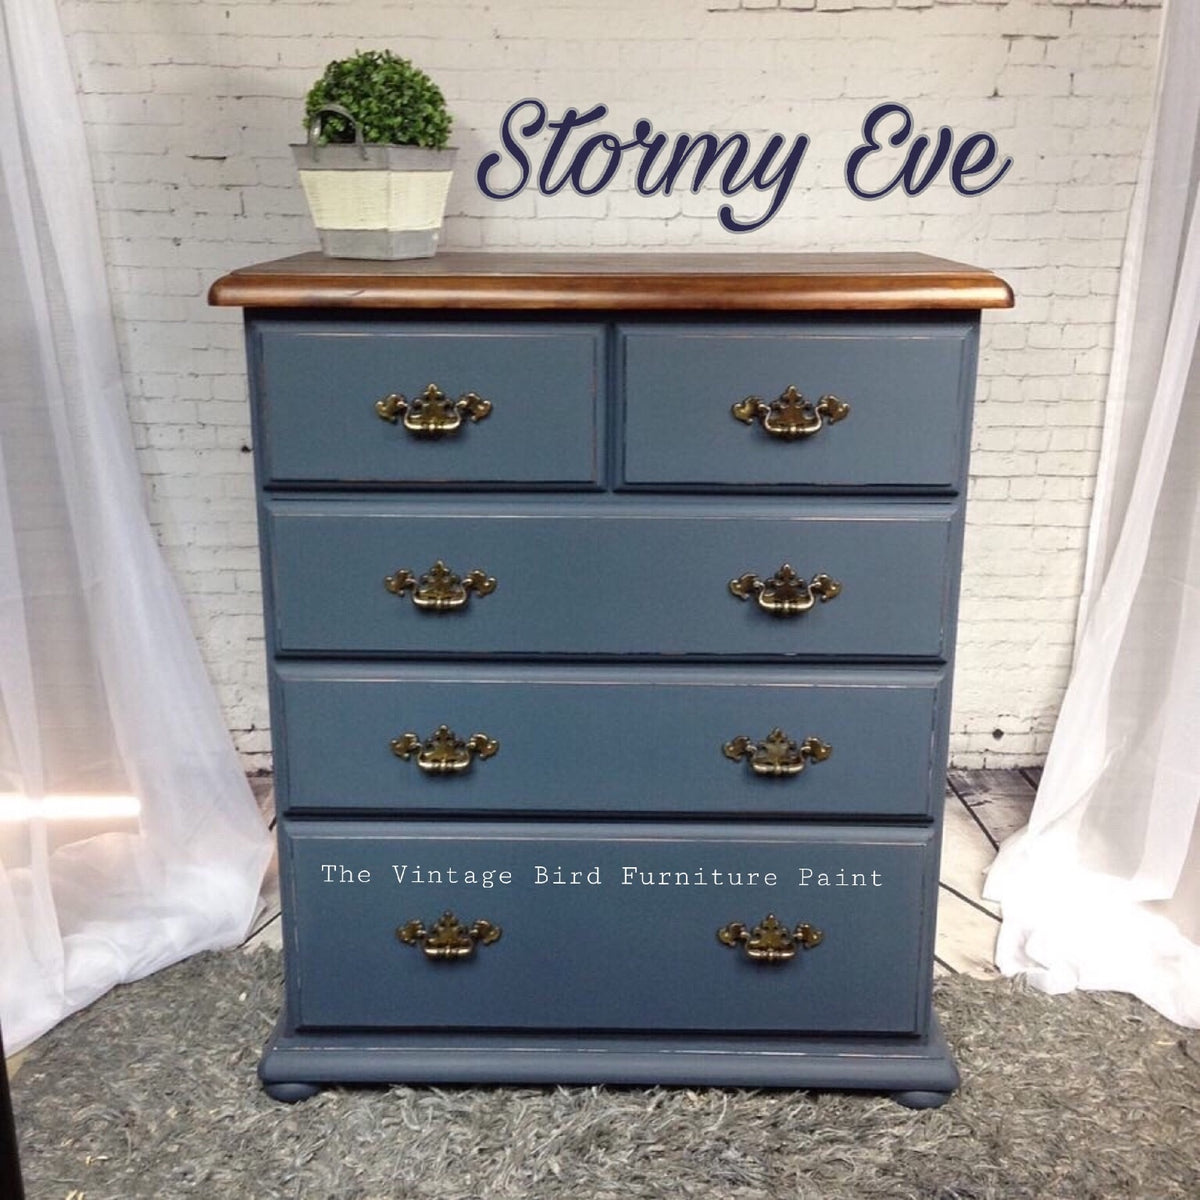 Stormy Eve - Bird on the Hill Designs